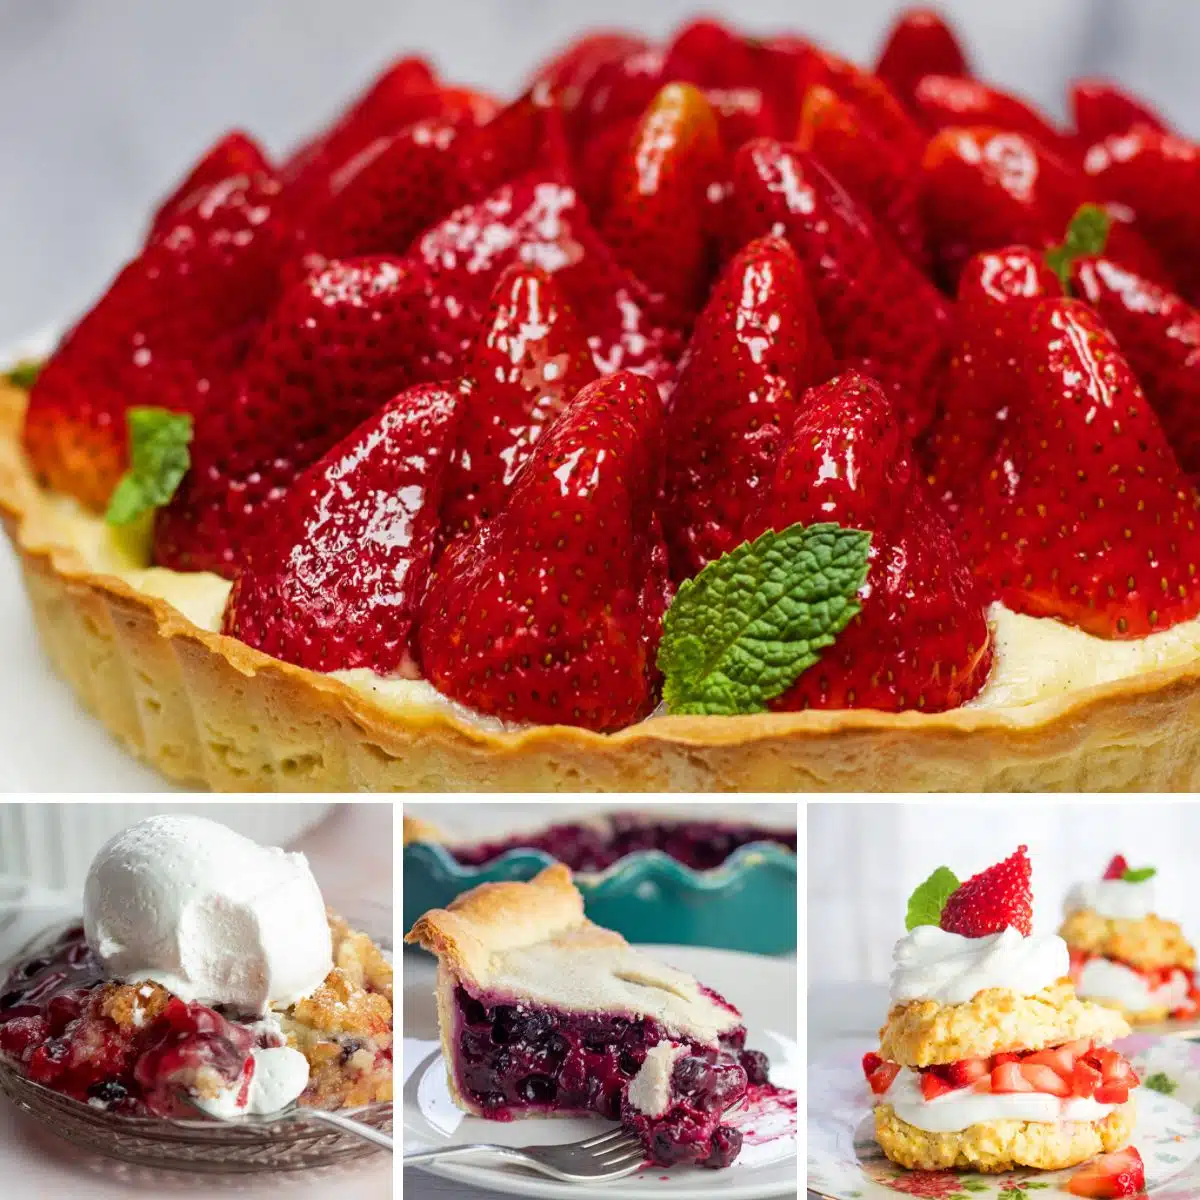 Best 4th of July desserts to share featuring 4 recipes in a collage image.